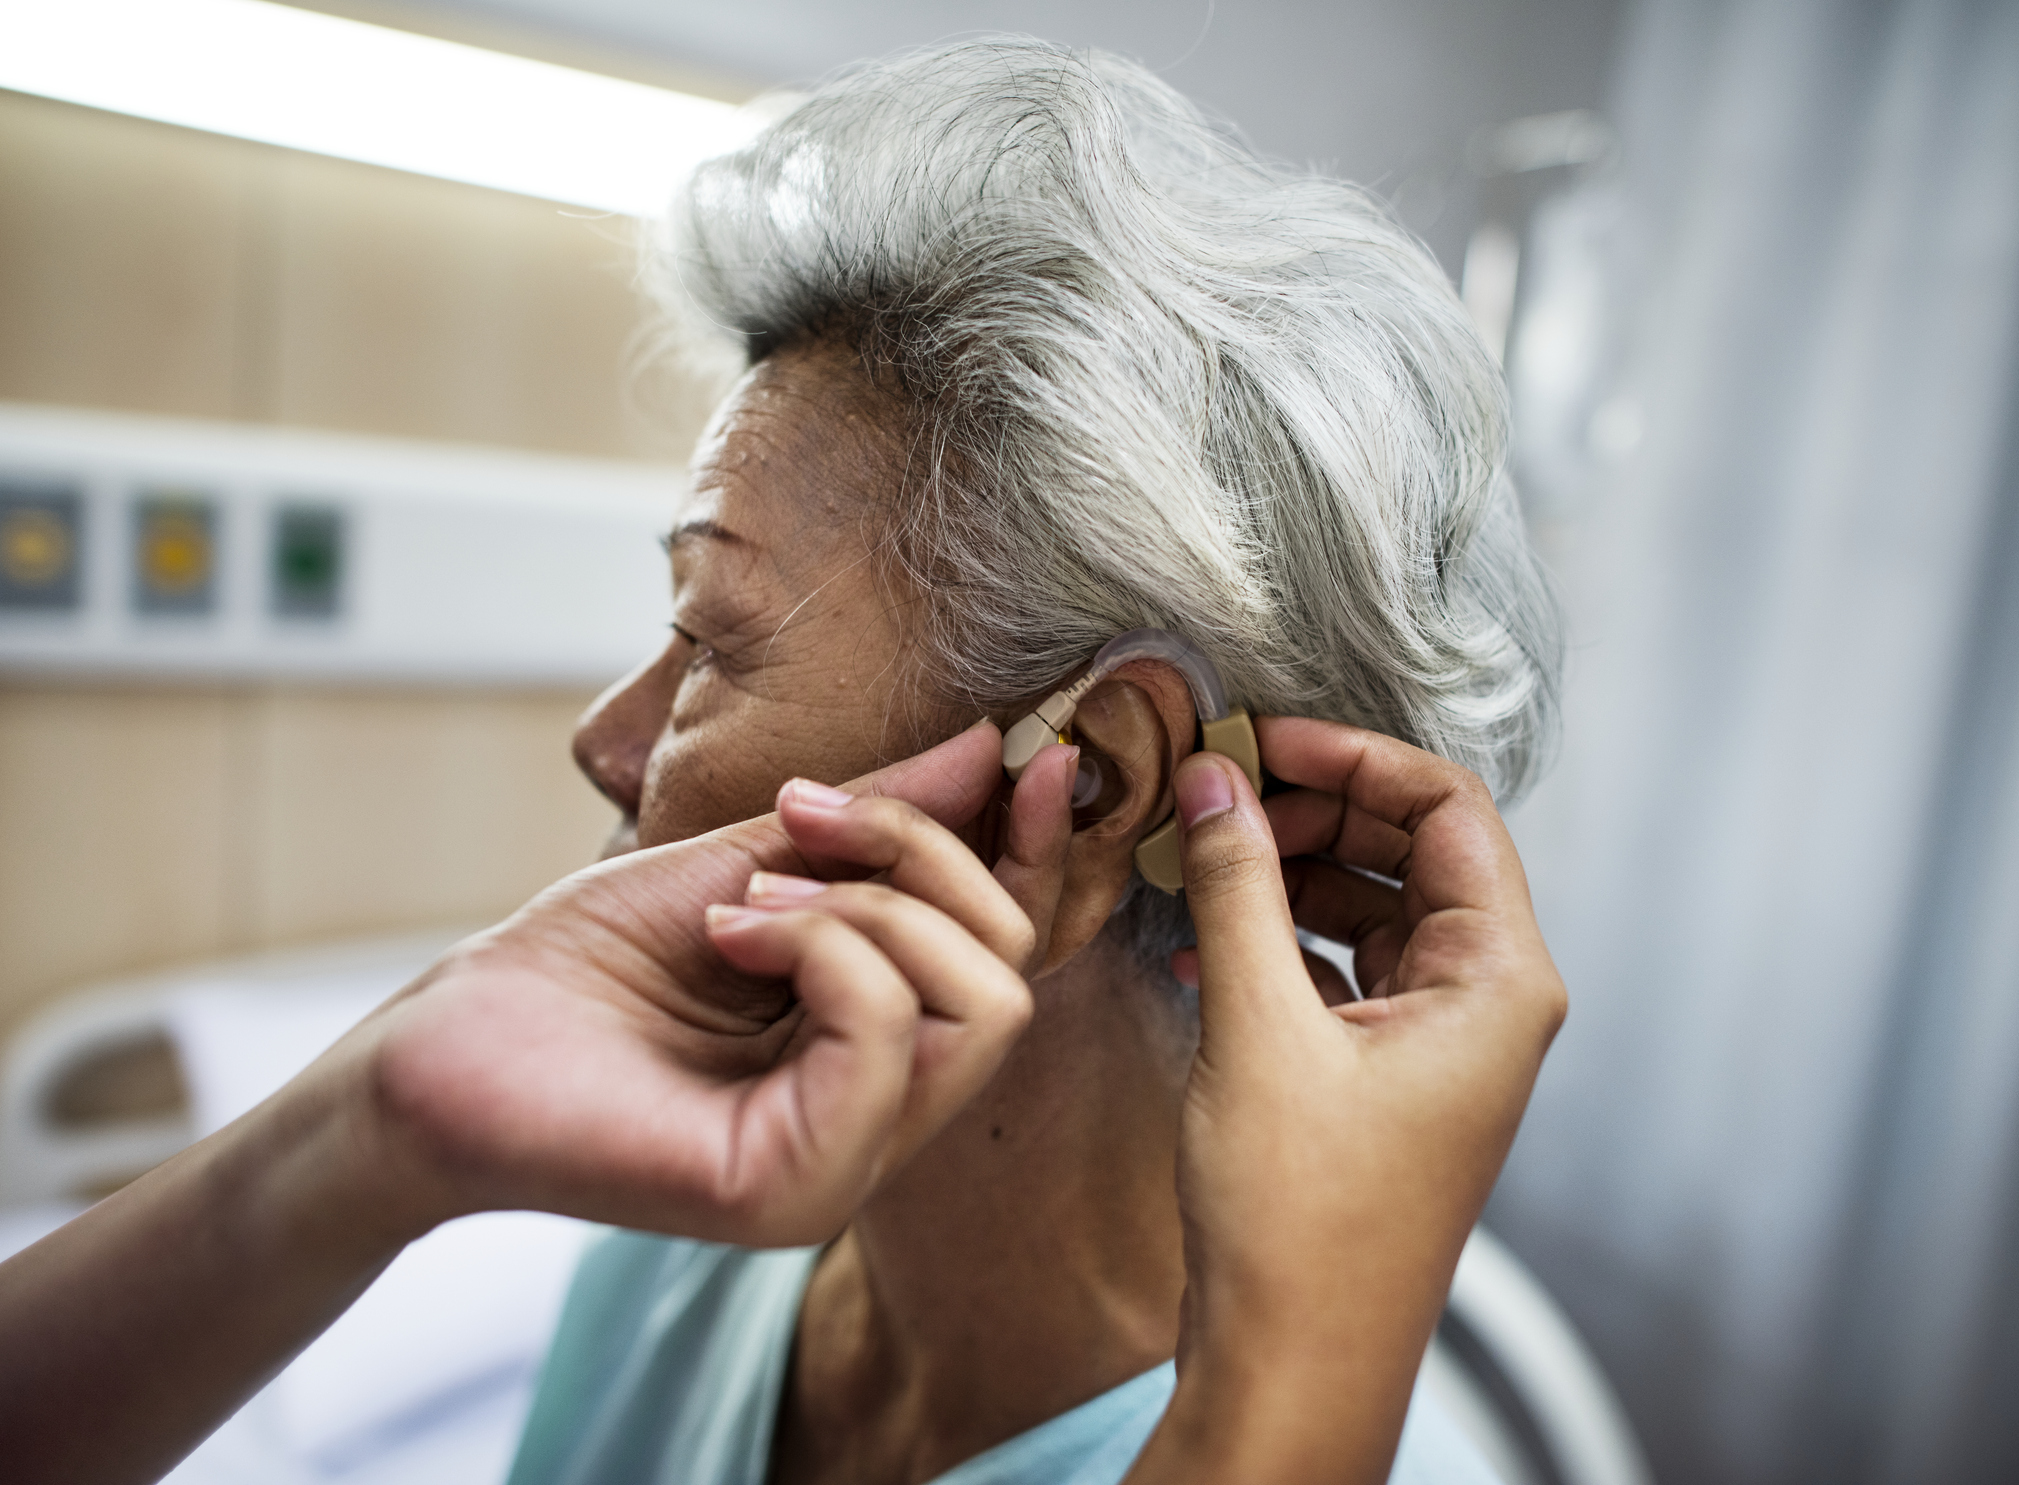 House Bill 1222 requires health carriers offering large group health plans and plans offered to public employees to include certain hearing-related coverage.